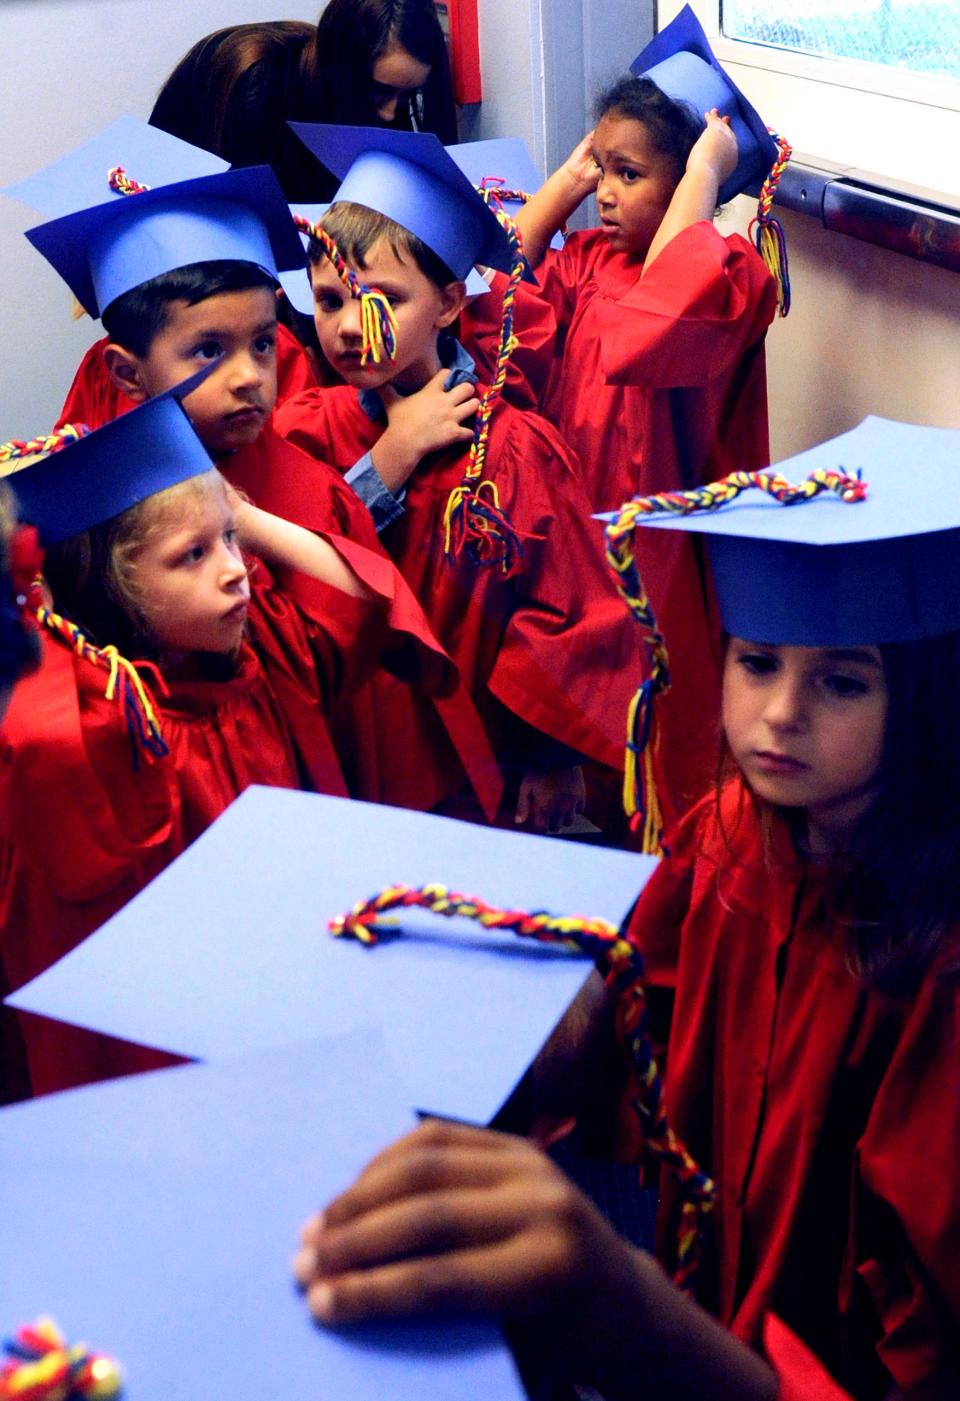 Day Nursery students "graduate" into kindergarten in 2016. Not only does child care allow parents to work, it provides youngsters with an early education foundation that improves their readiness for school.